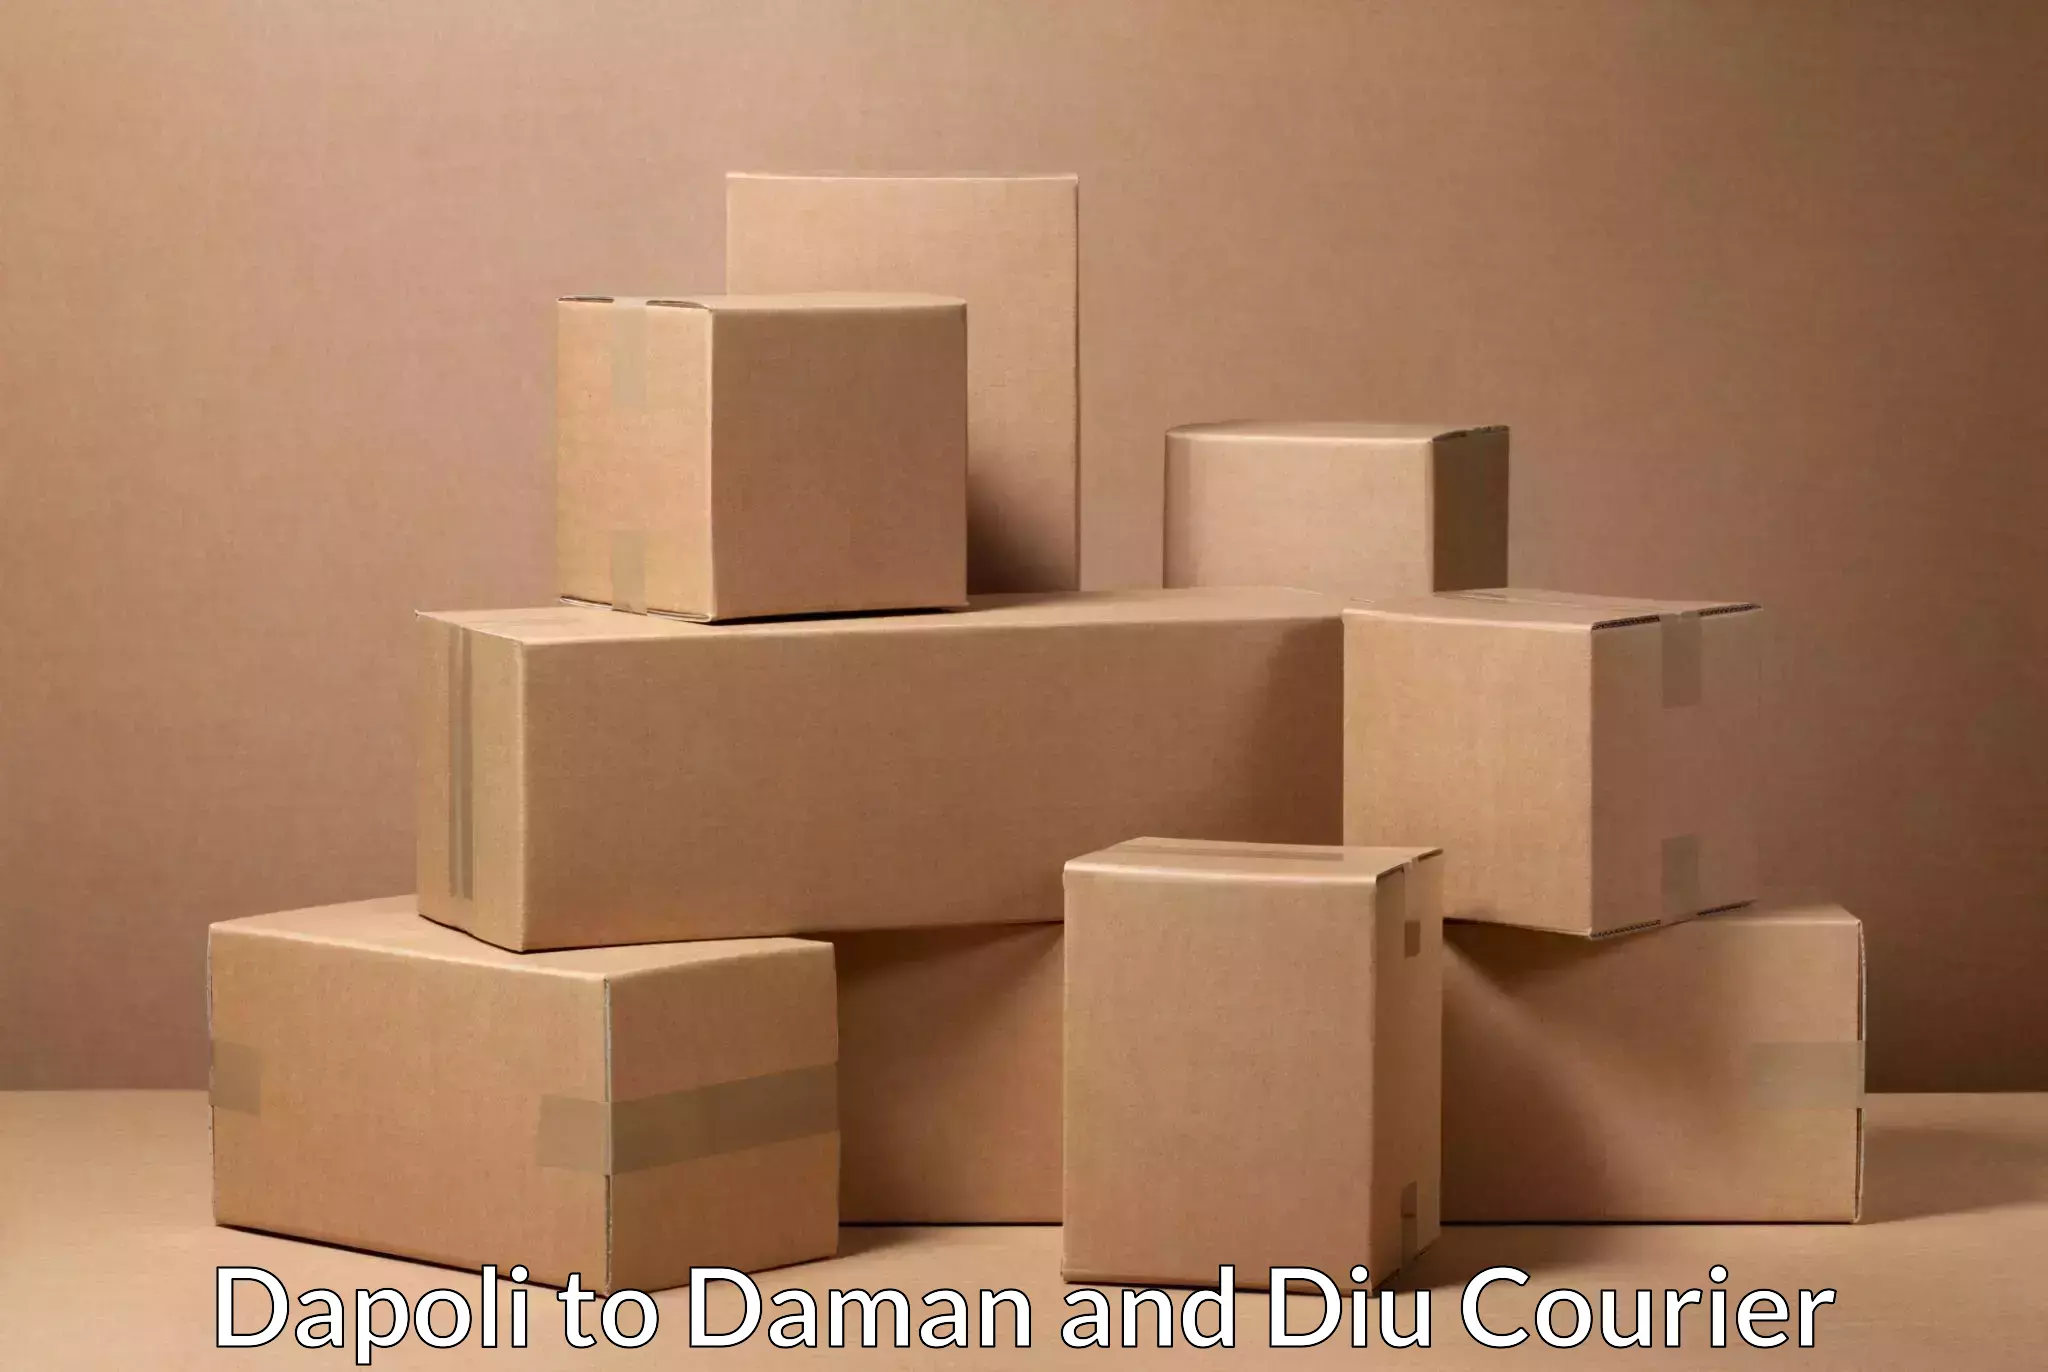 Advanced package delivery in Dapoli to Daman and Diu